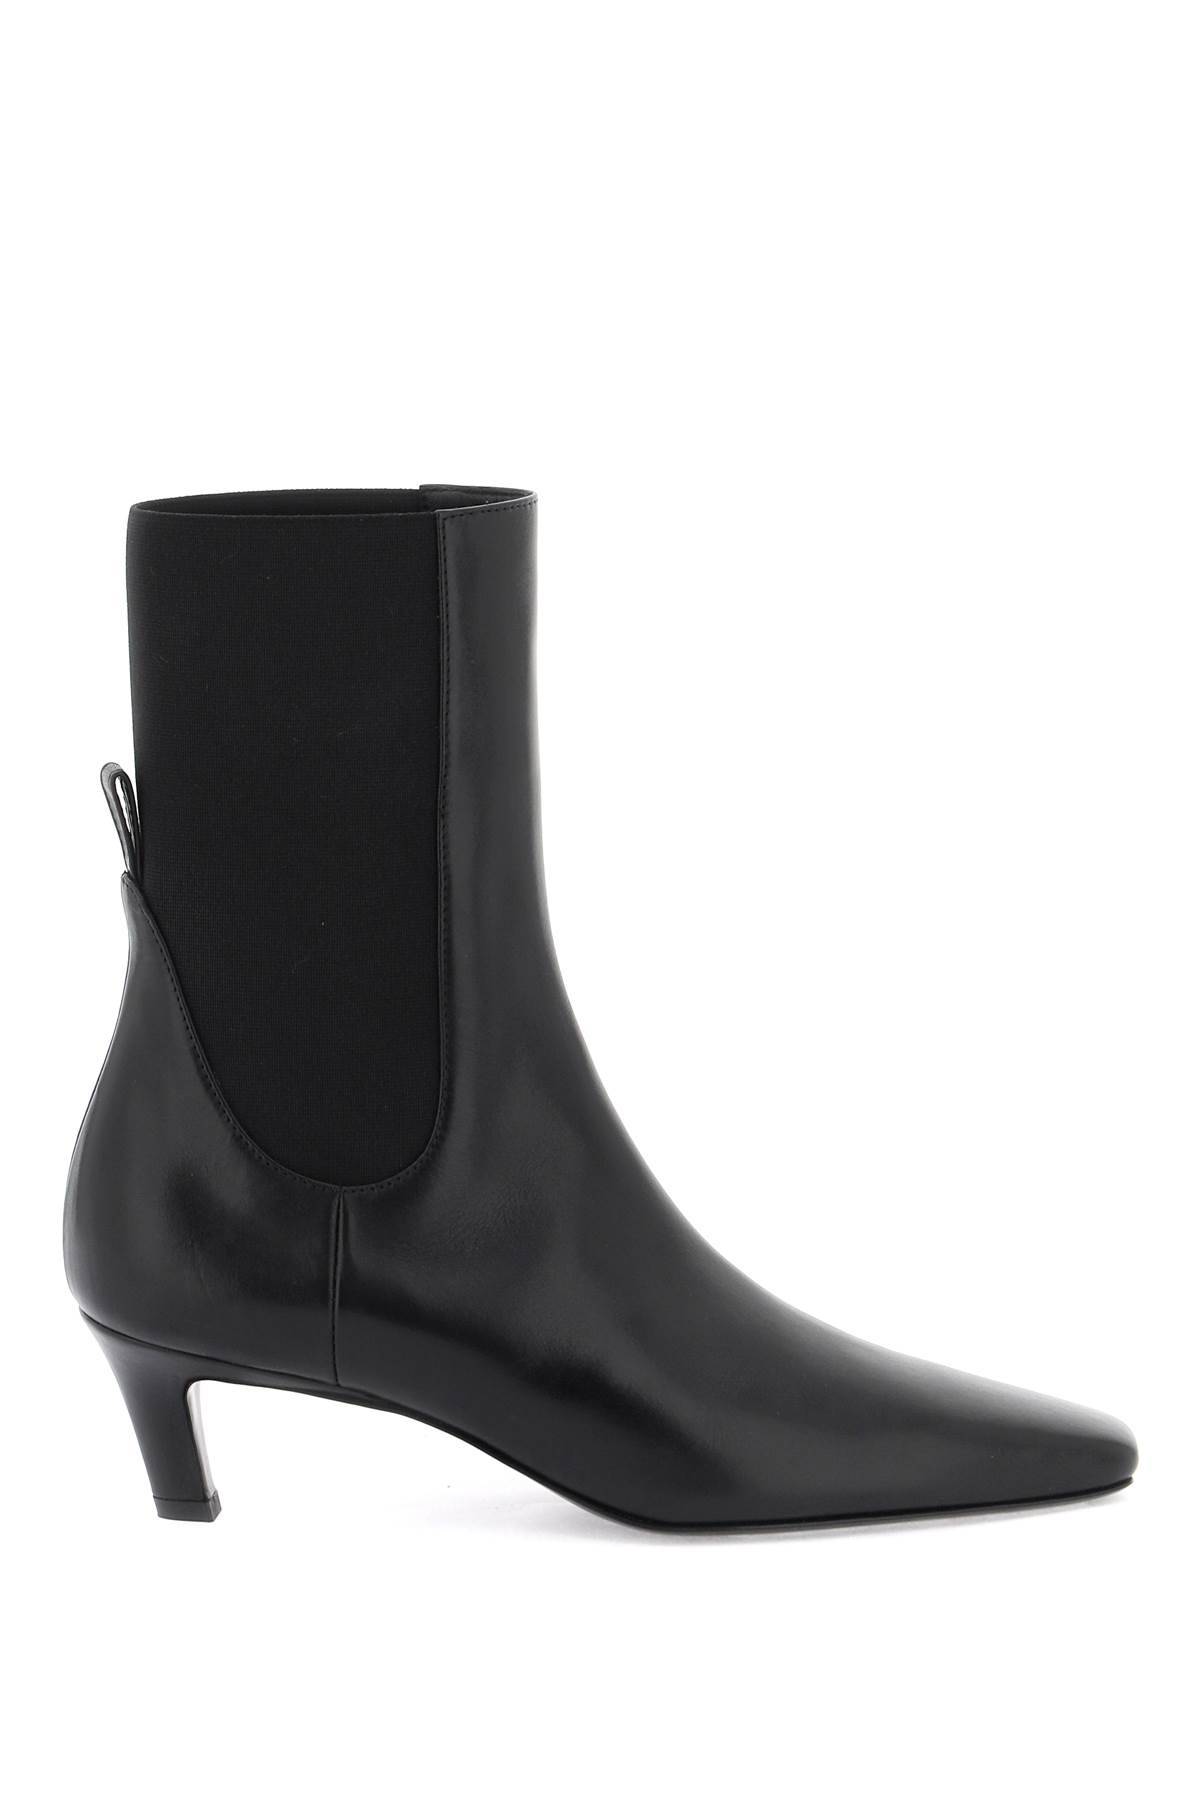 Toteme TOTEME mid heel leather boots